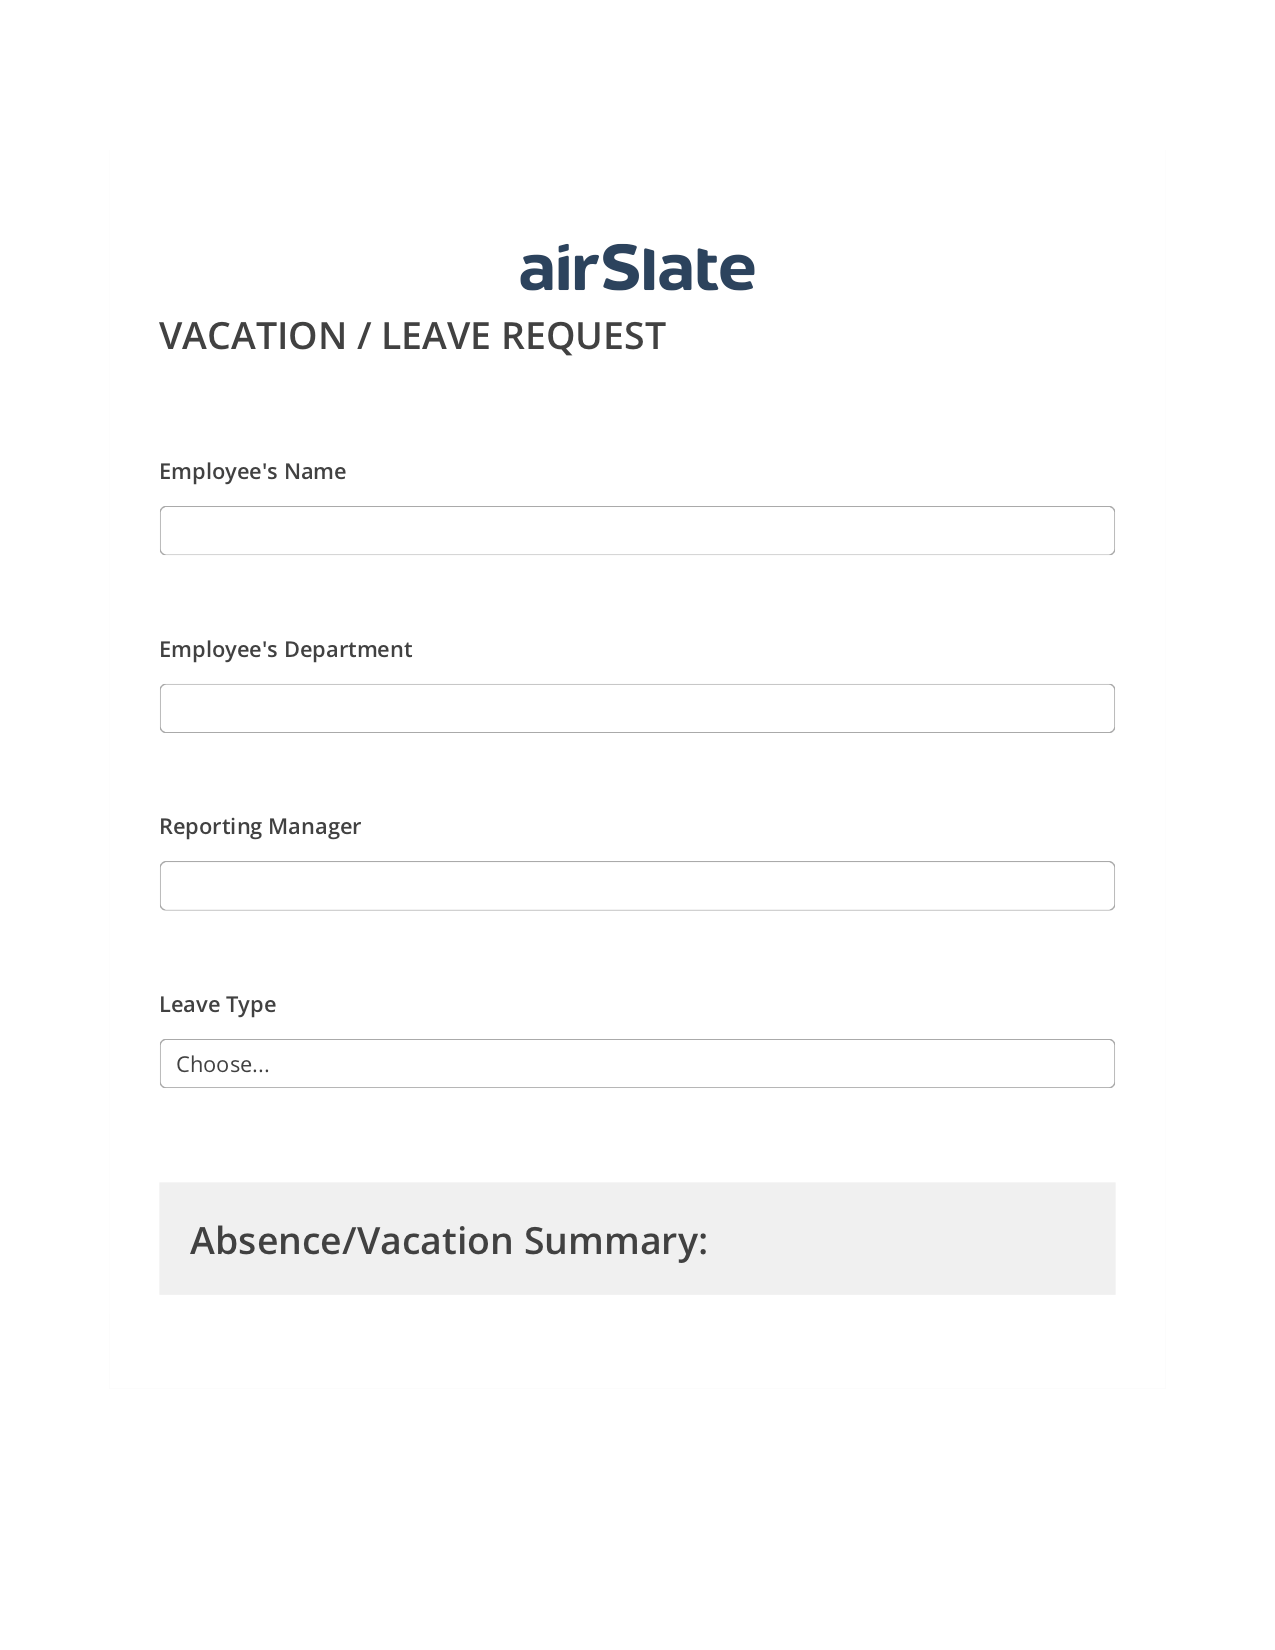 Multirole Vacation/Leave Request Workflow Pre-fill Dropdowns from CSV file Bot, Create Slate Reminder Bot, Archive to SharePoint Folder Bot